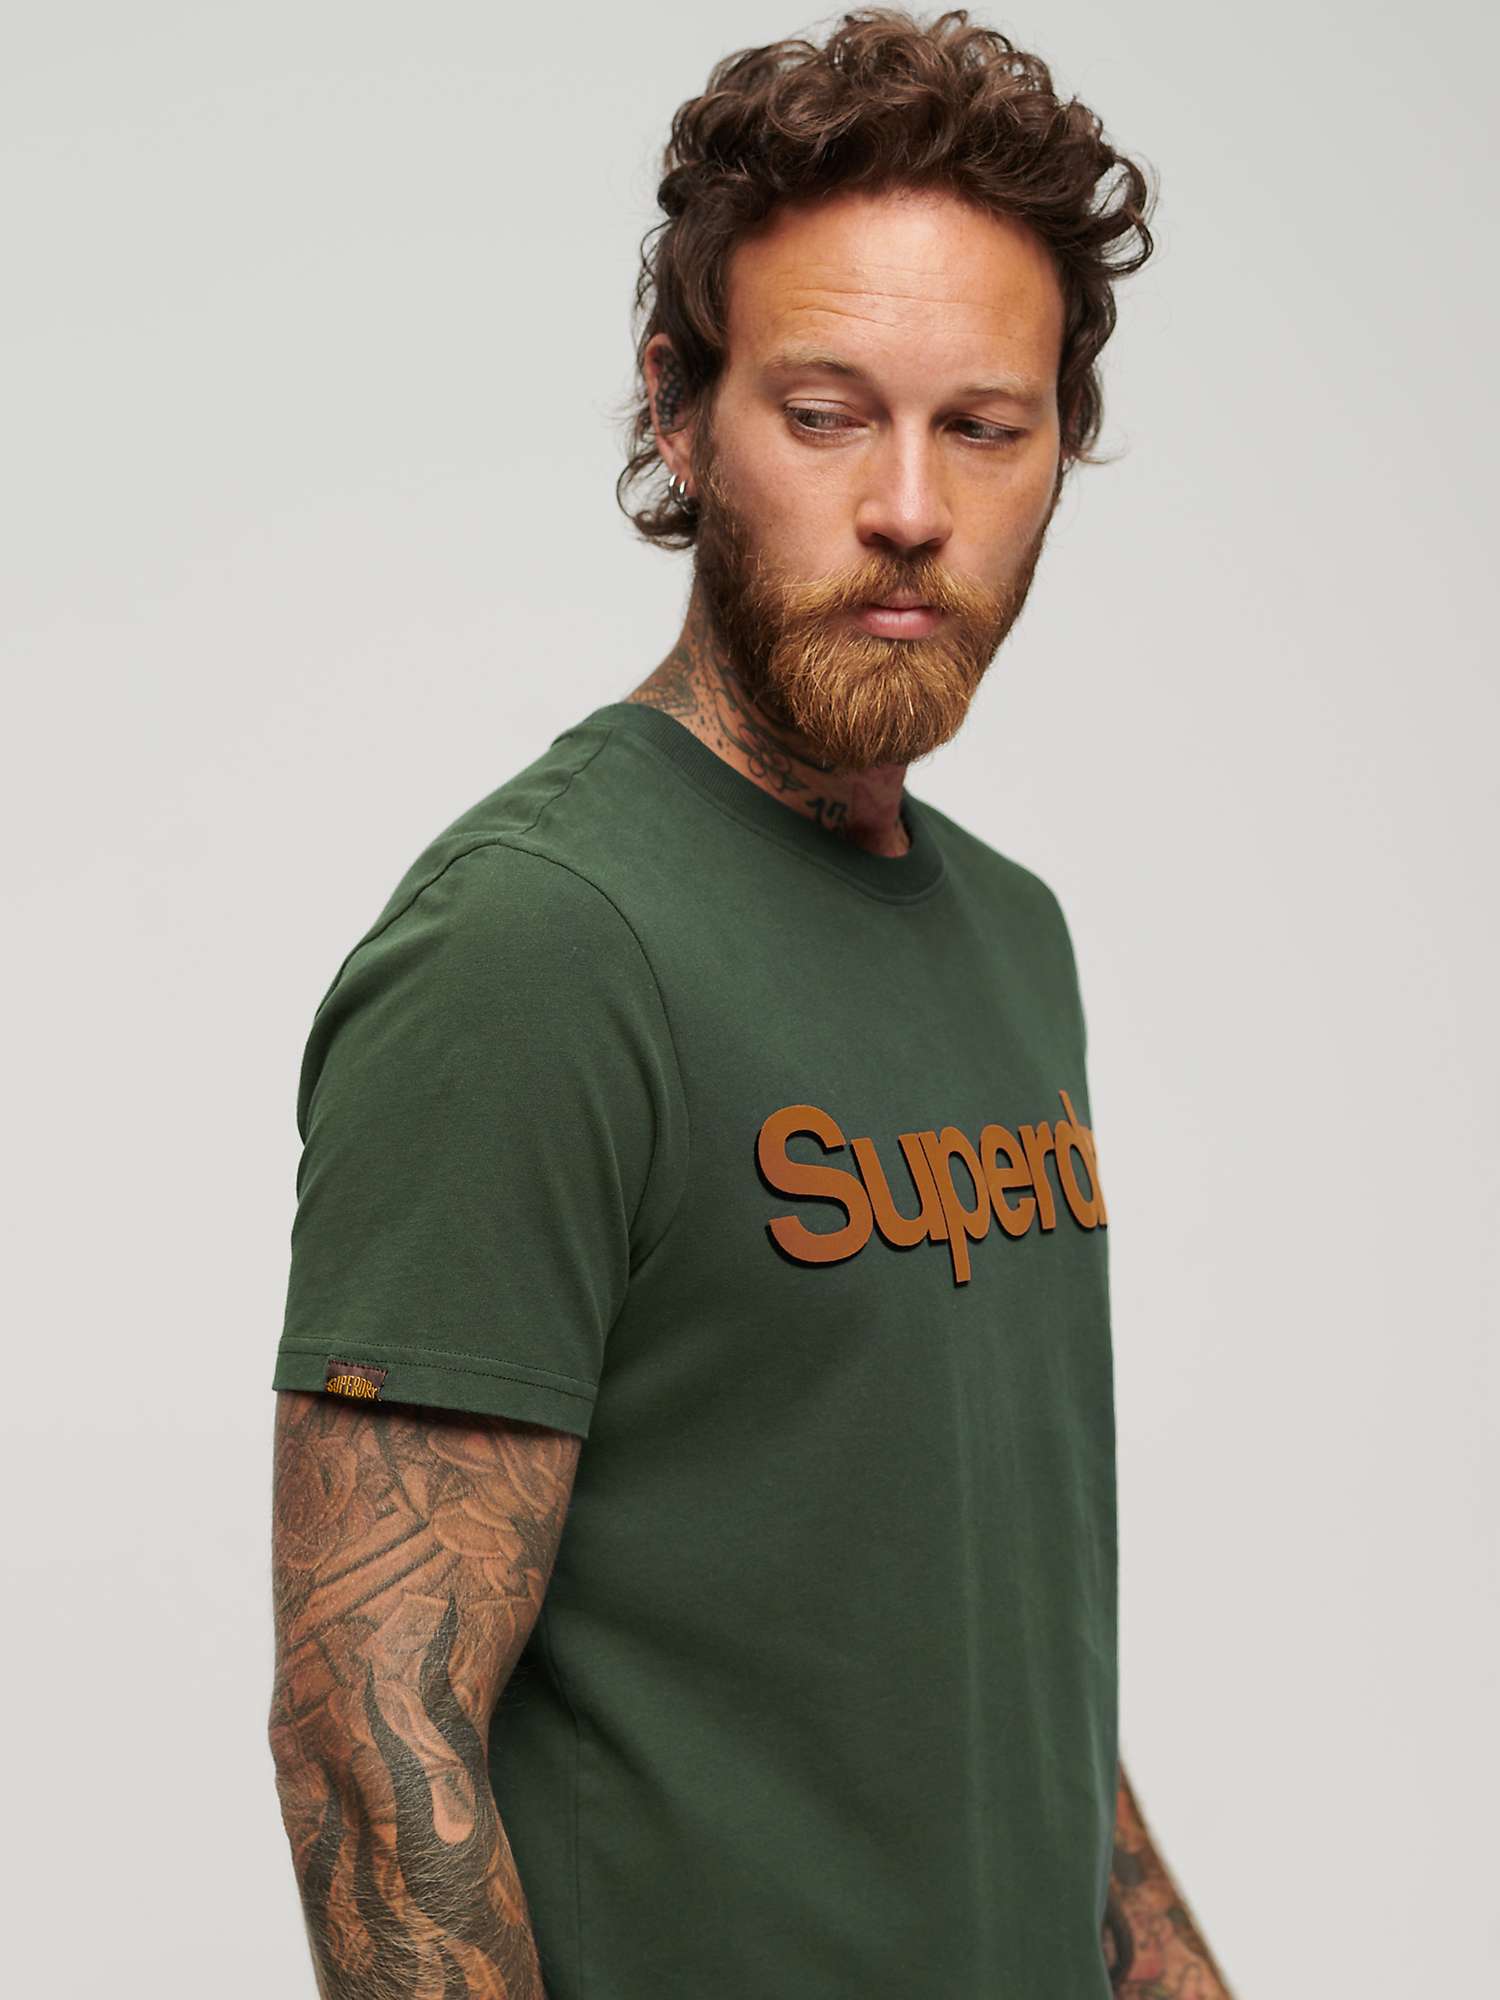 Buy Superdry Core Classic Logo T-Shirt Online at johnlewis.com